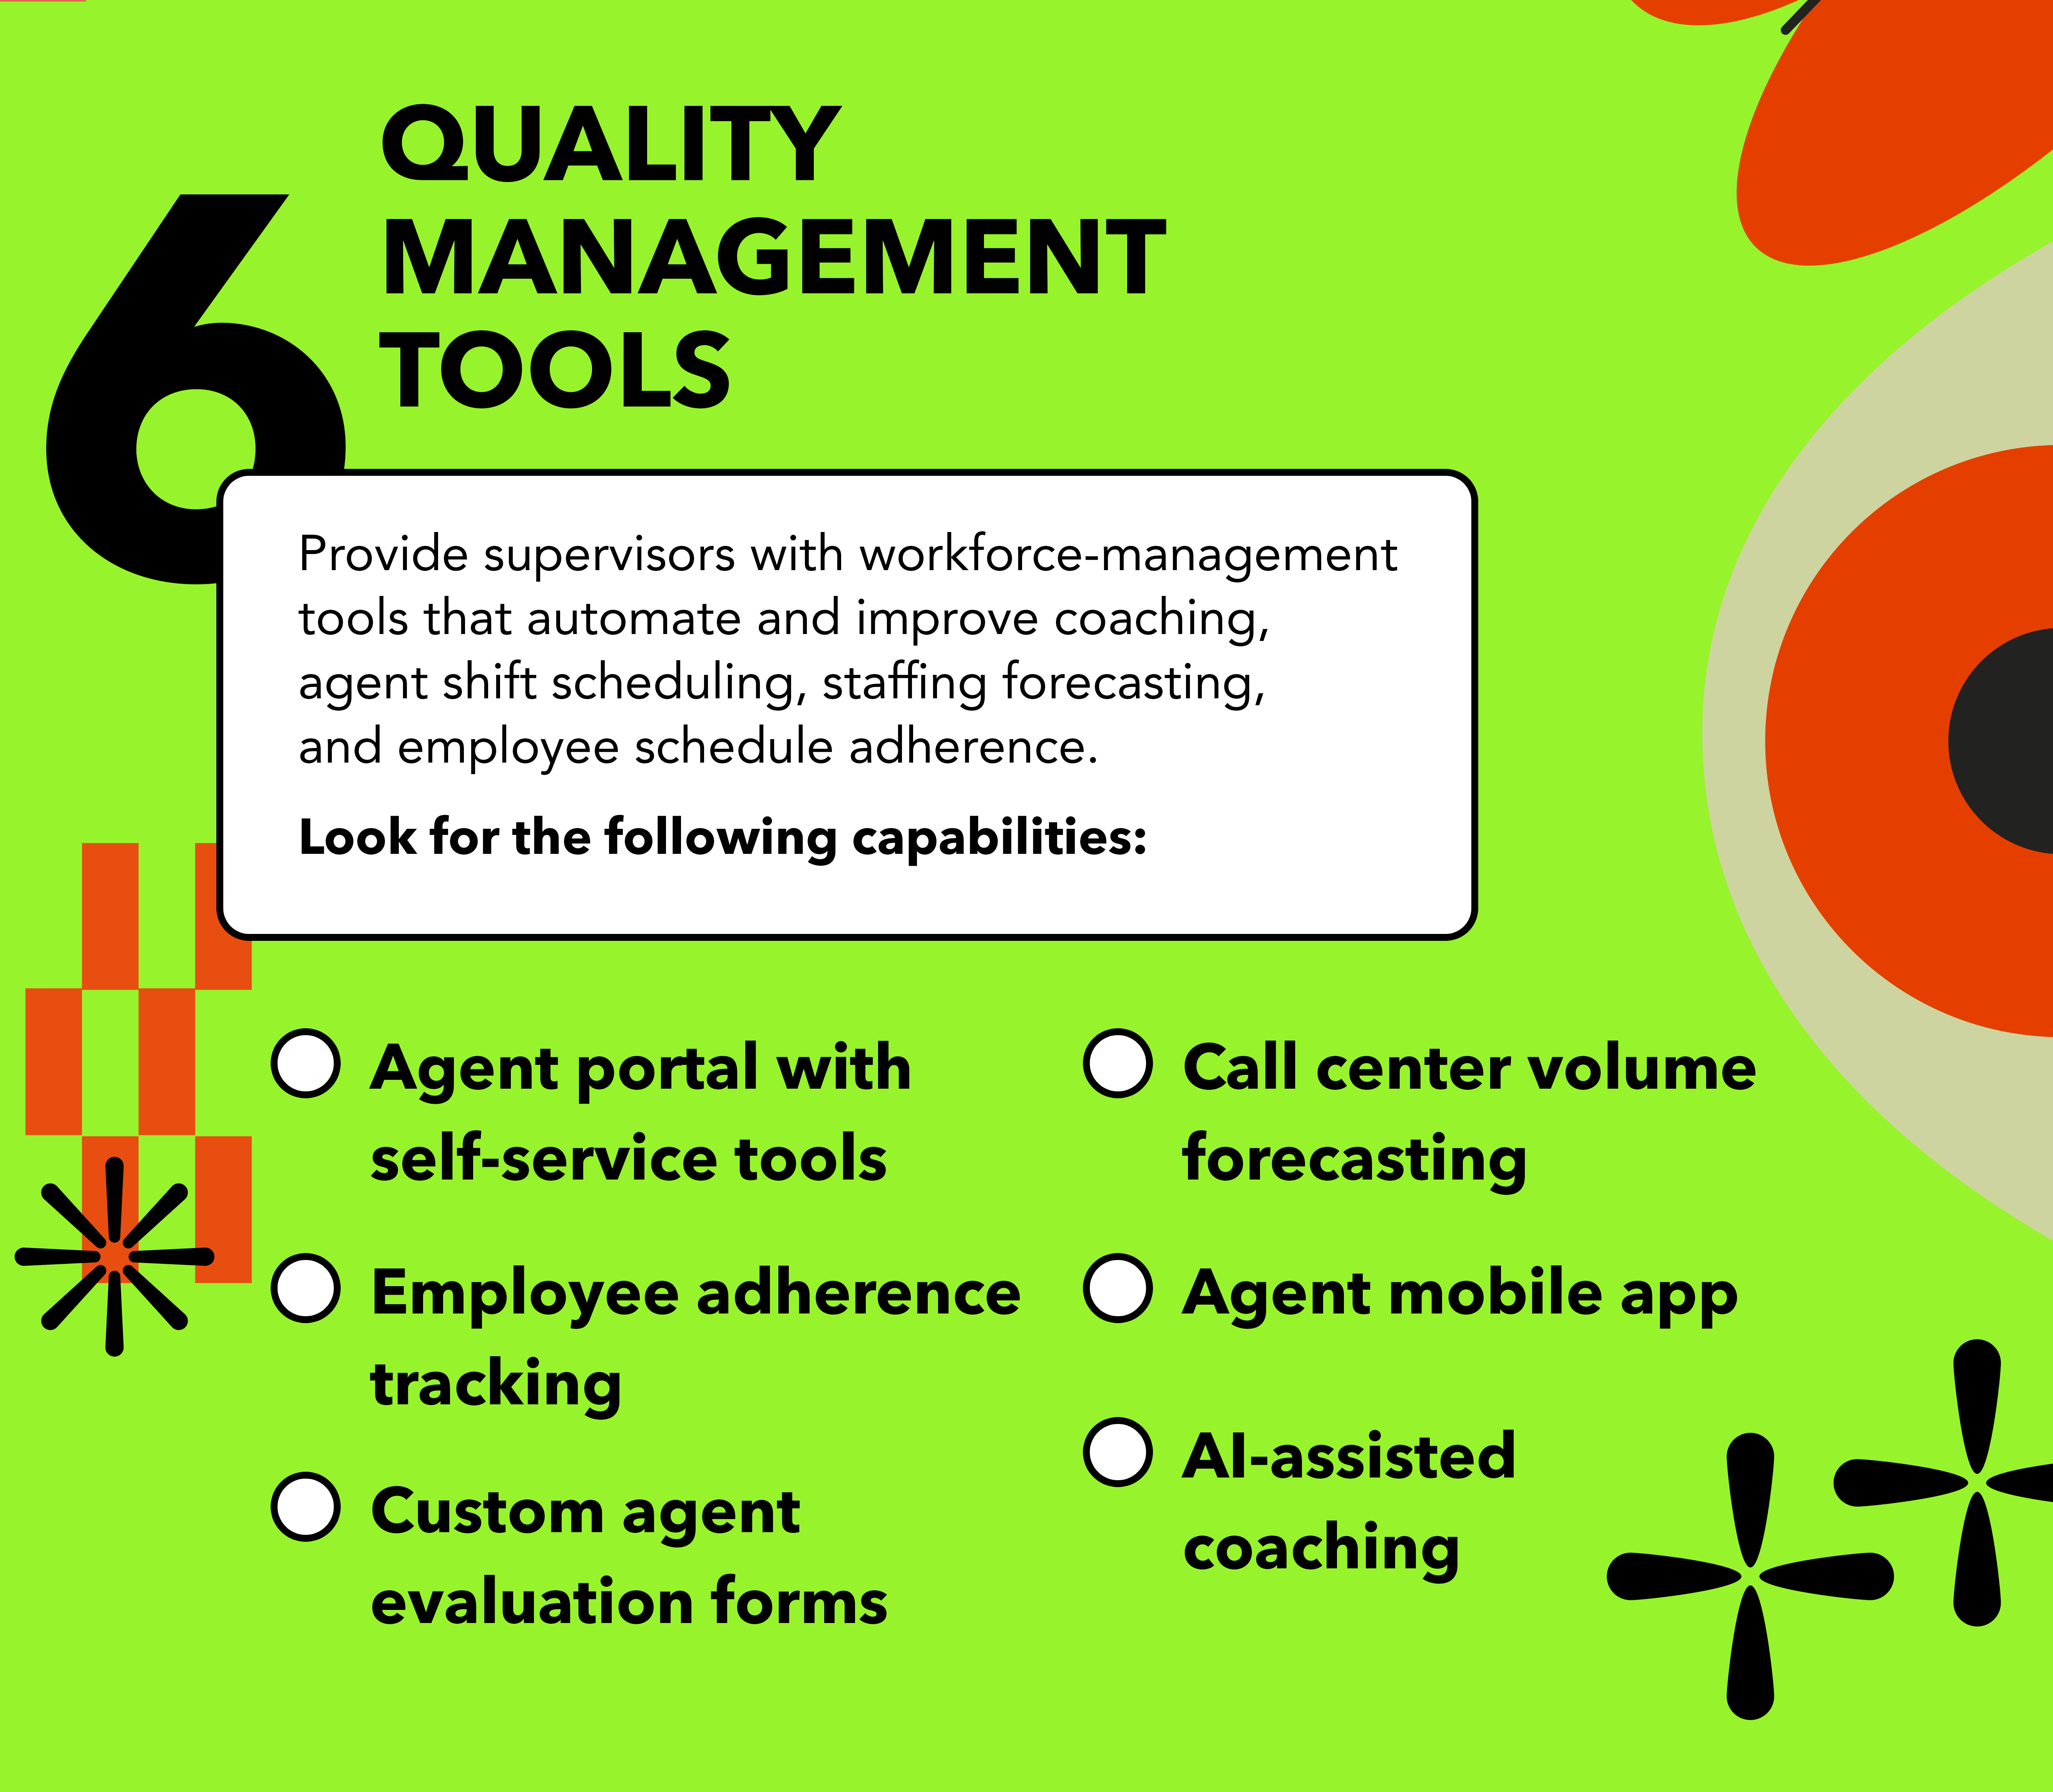 Contact center software requirements checklist - quality management tools